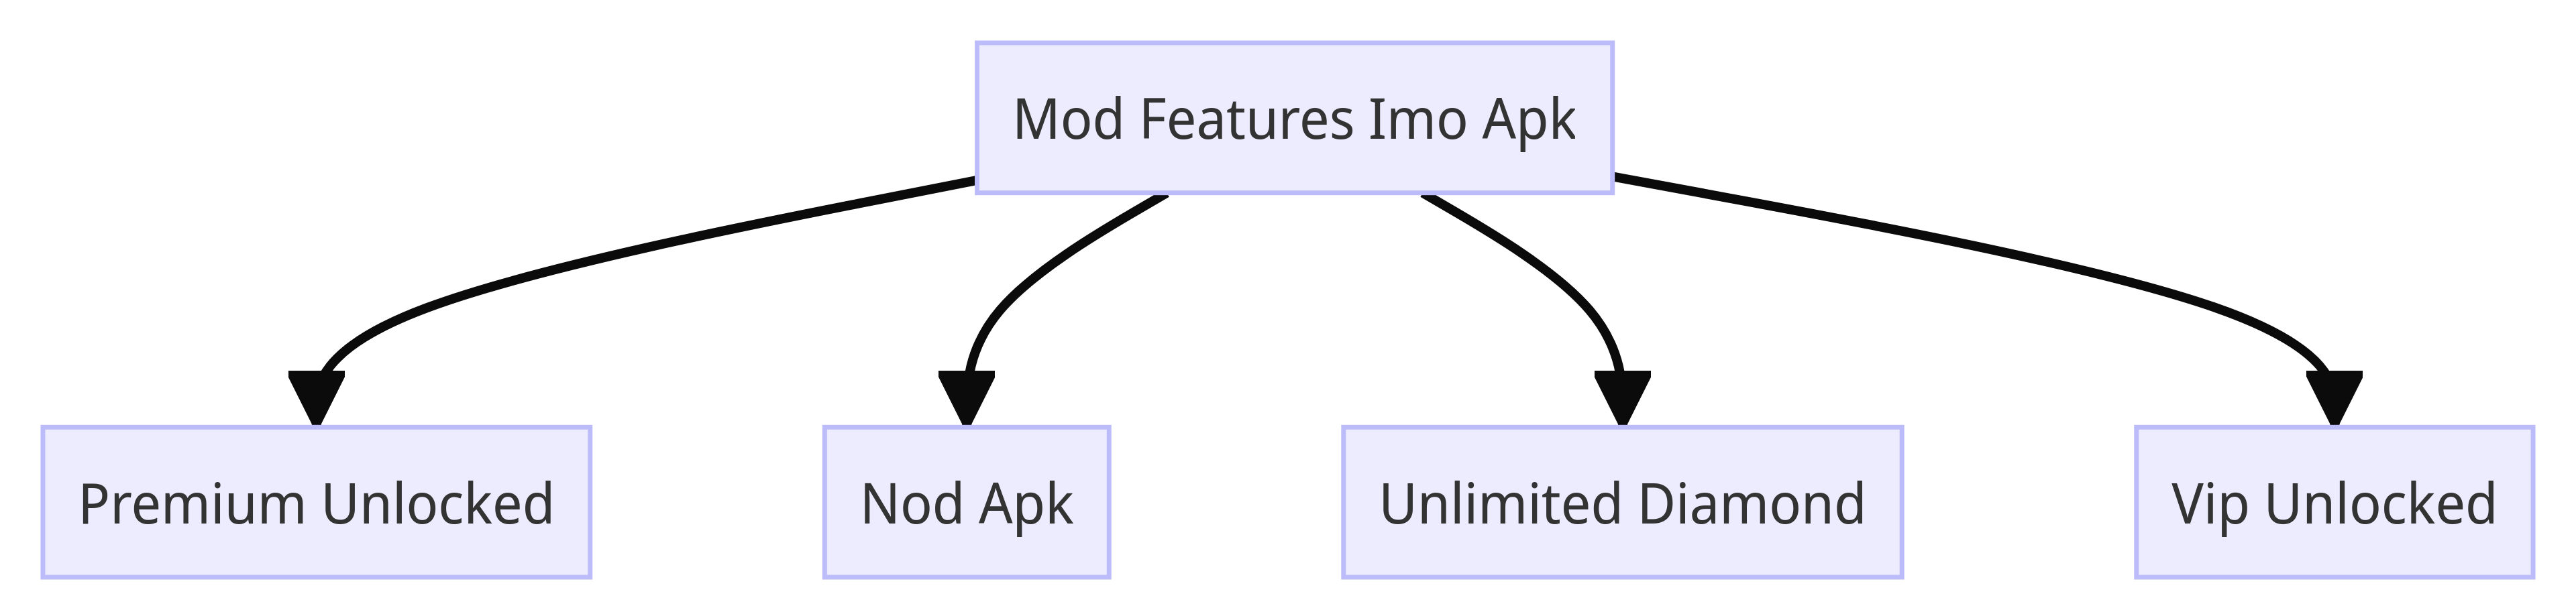 Mod Features Imo Apk